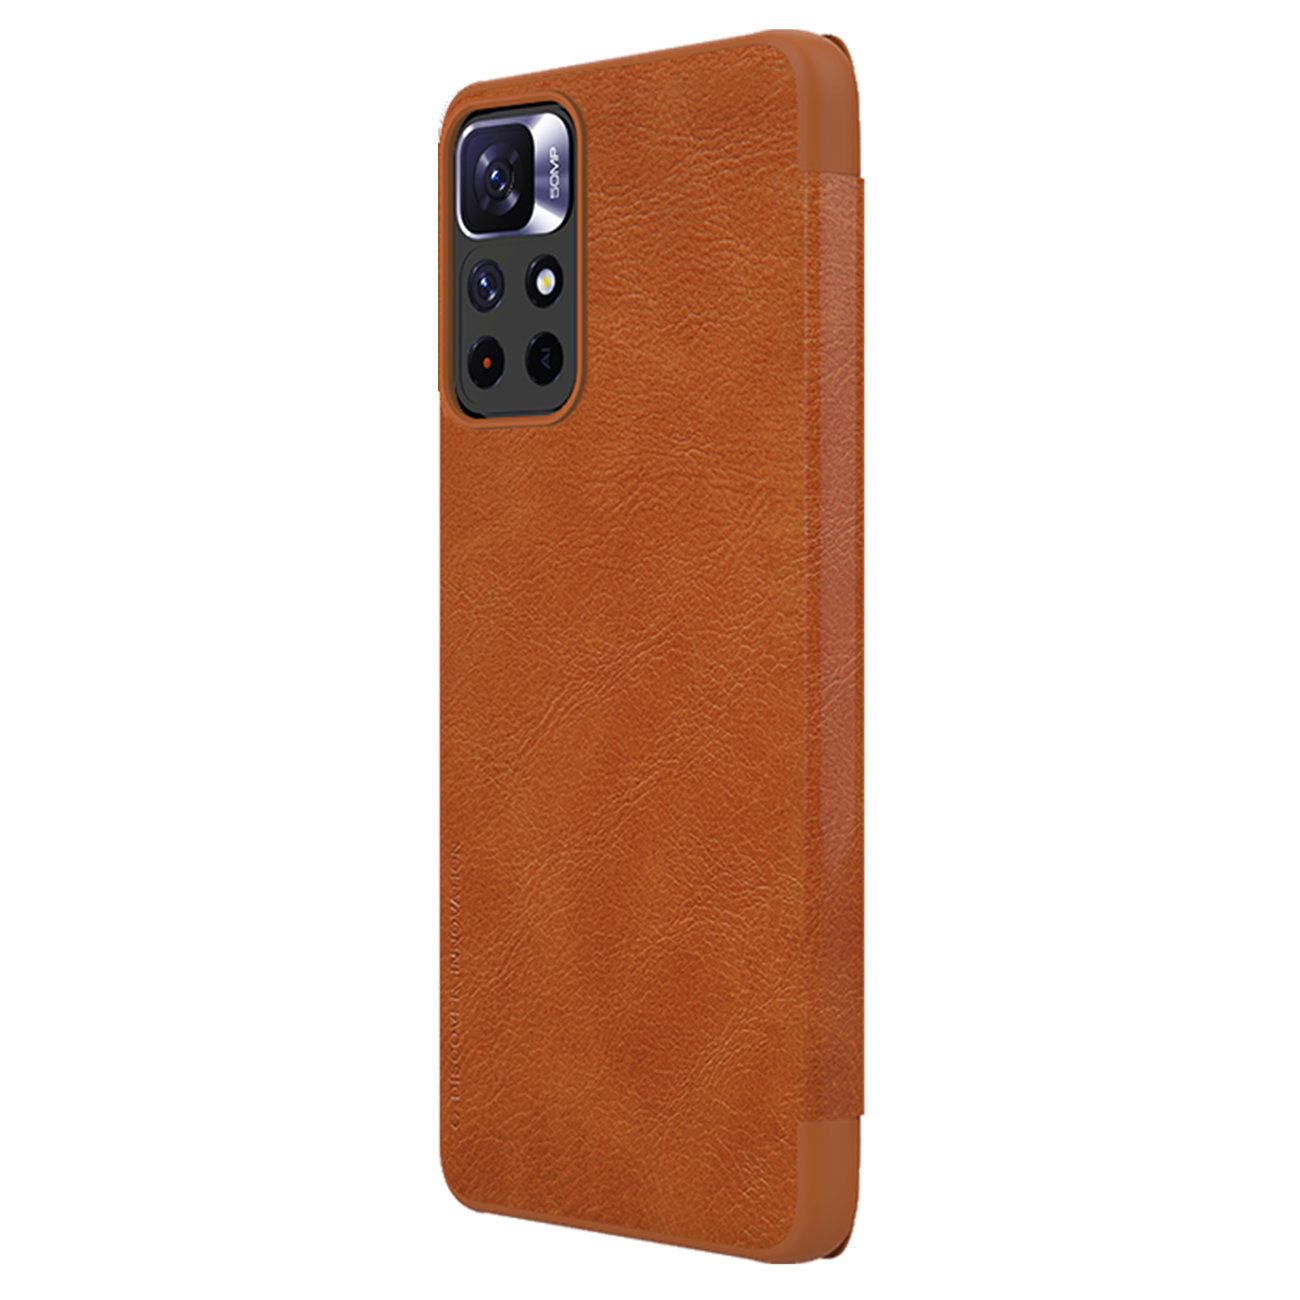 Nillkin Qin Case Case for Xiaomi Redmi Note 11T 5G / Note 11S 5G / Note 11 5G (China) / Poco M4 Pro 5G Camera Protector Holster Cover Flip Cover Brown